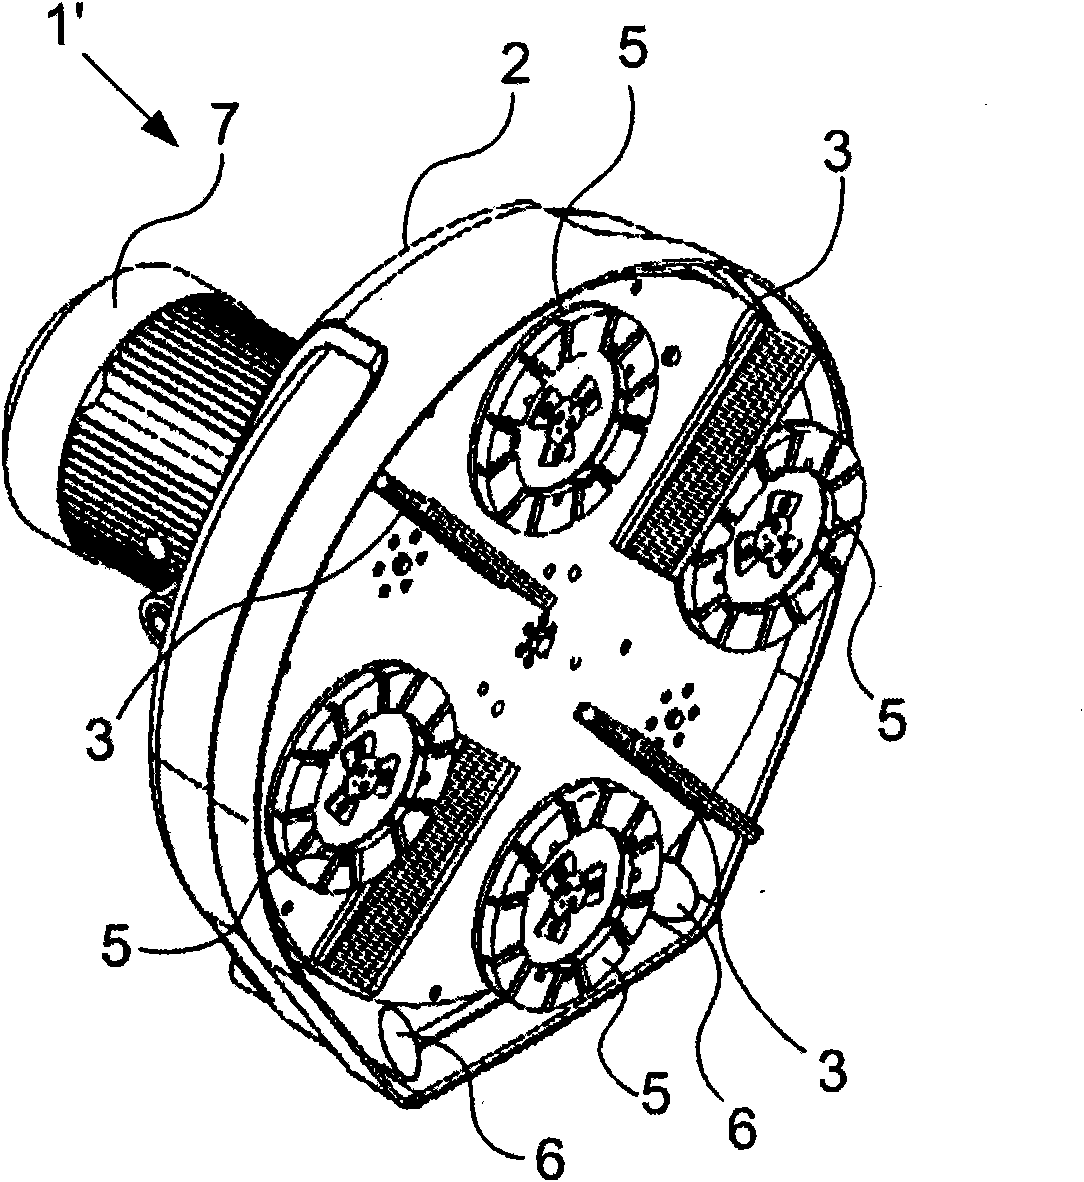 Device and method for improved collection of dust in treatment of floor surfaces